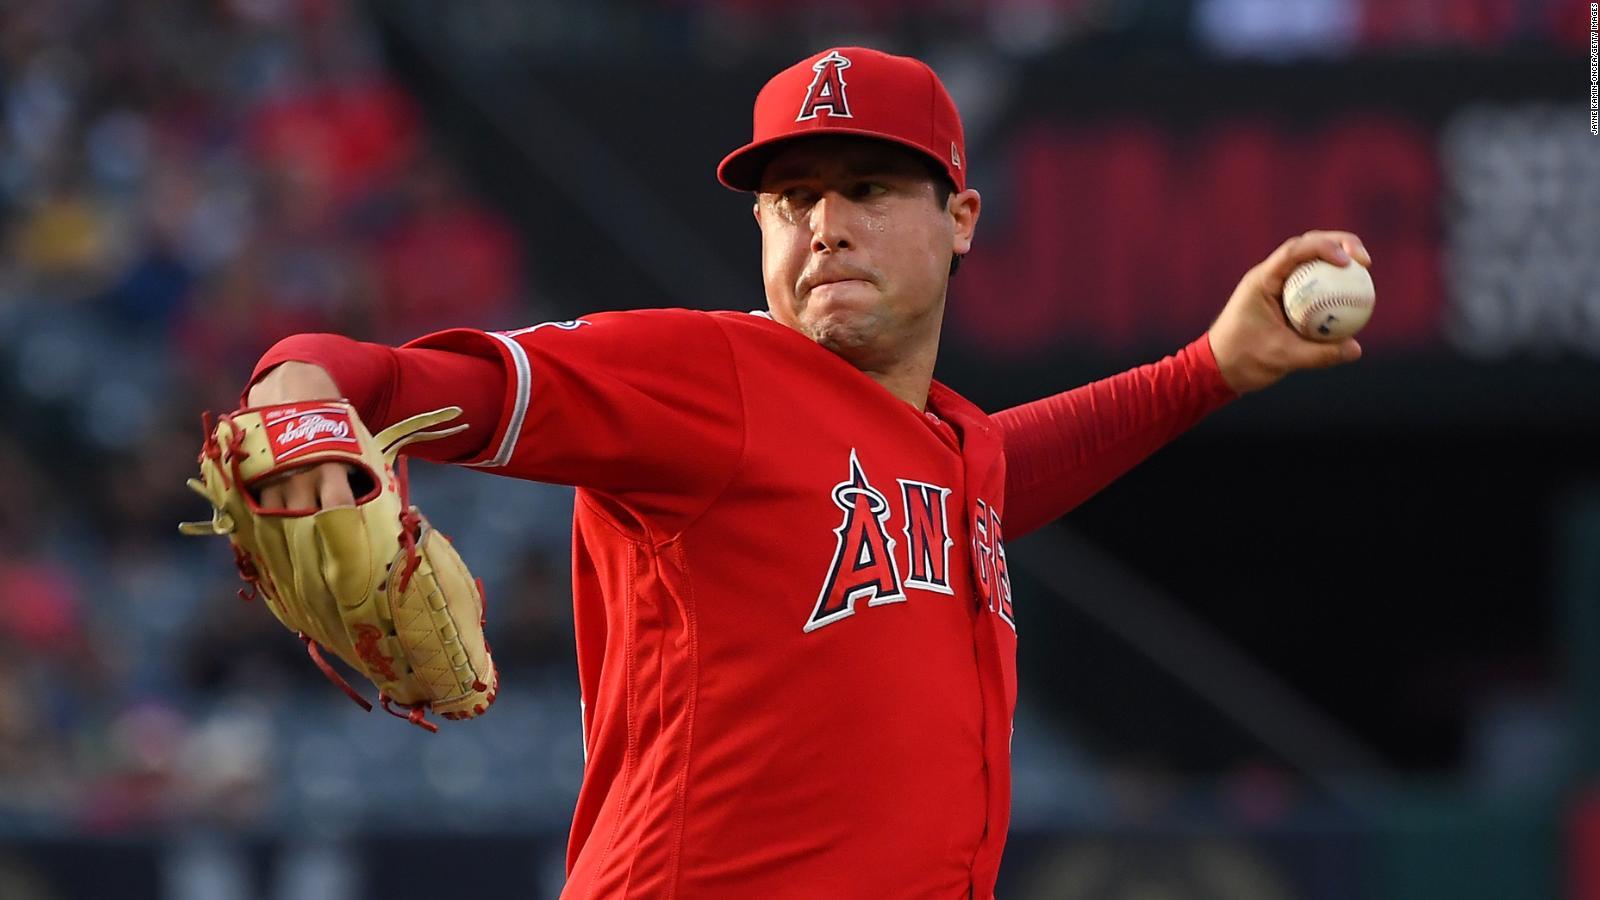 Los Angeles Angels pitcher Tyler Skaggs, has died